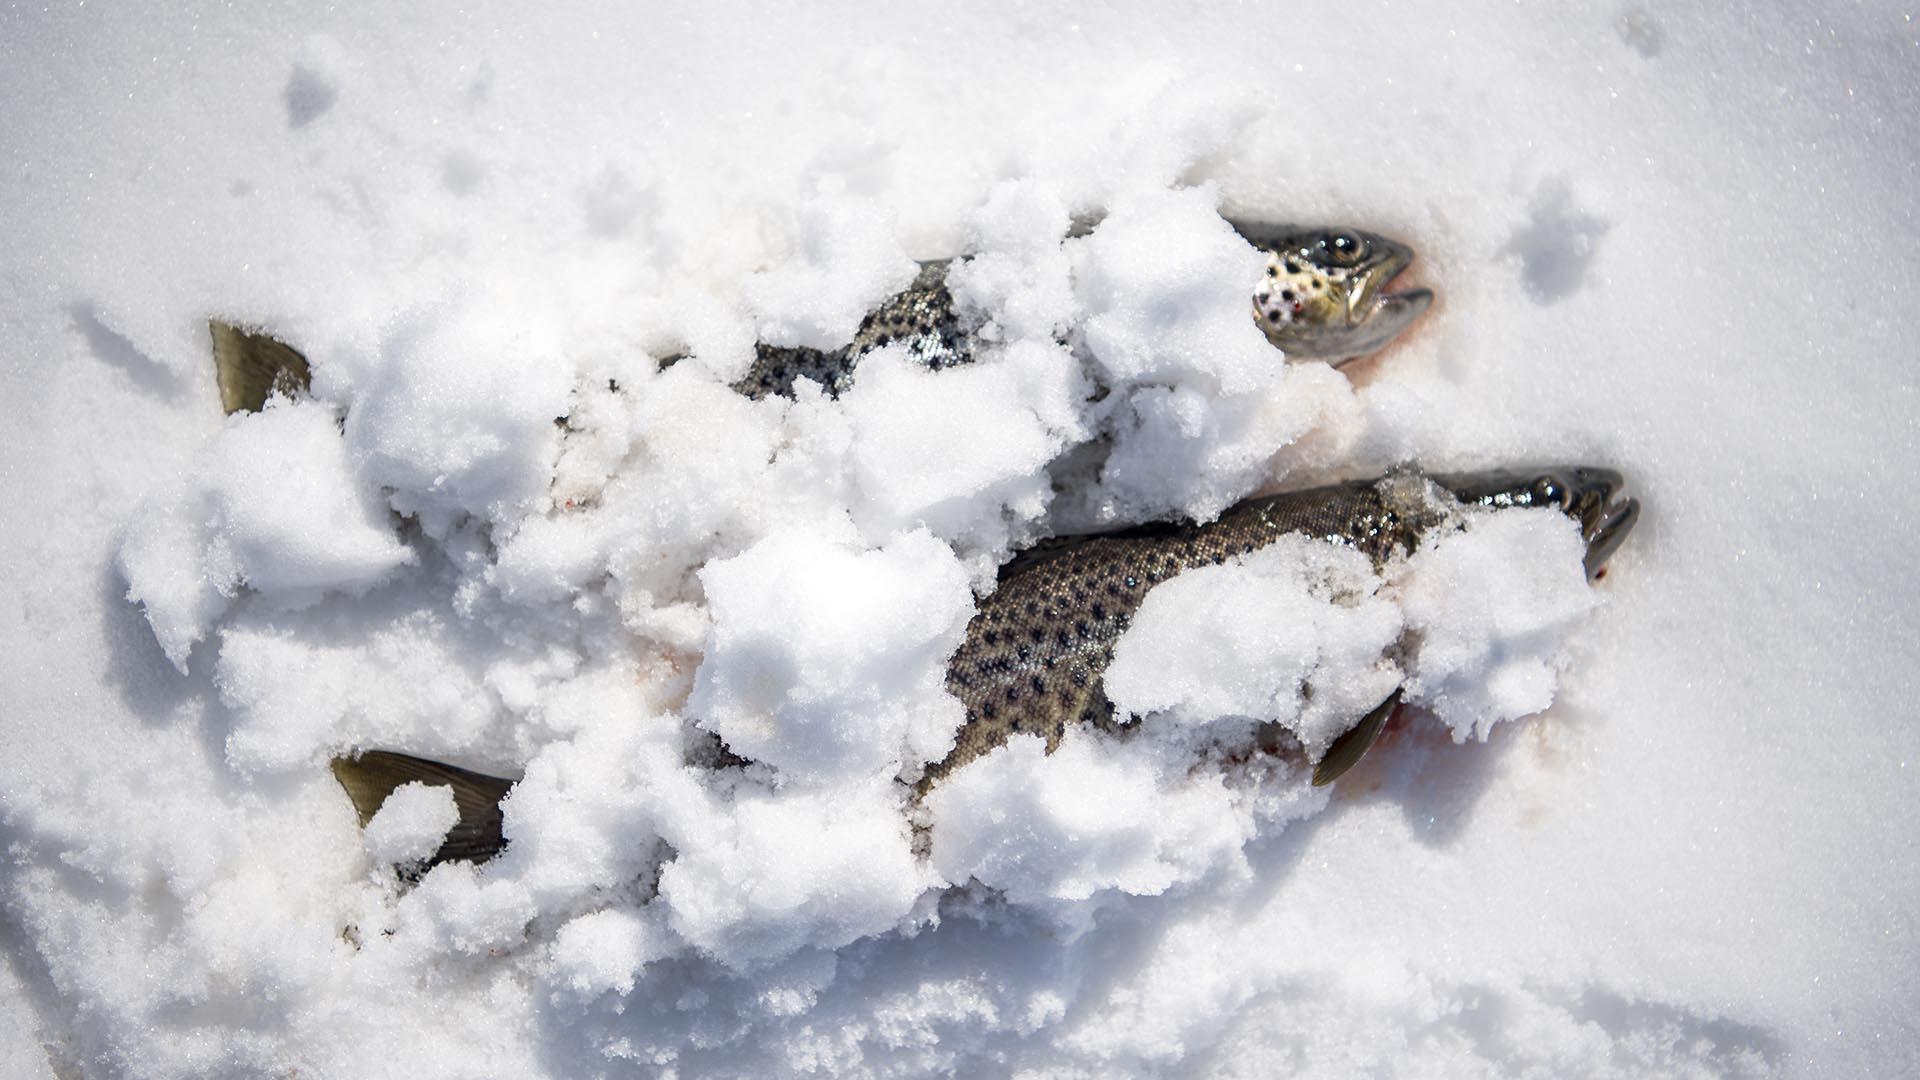 Ice fished trout covered with snow to keep cooled.